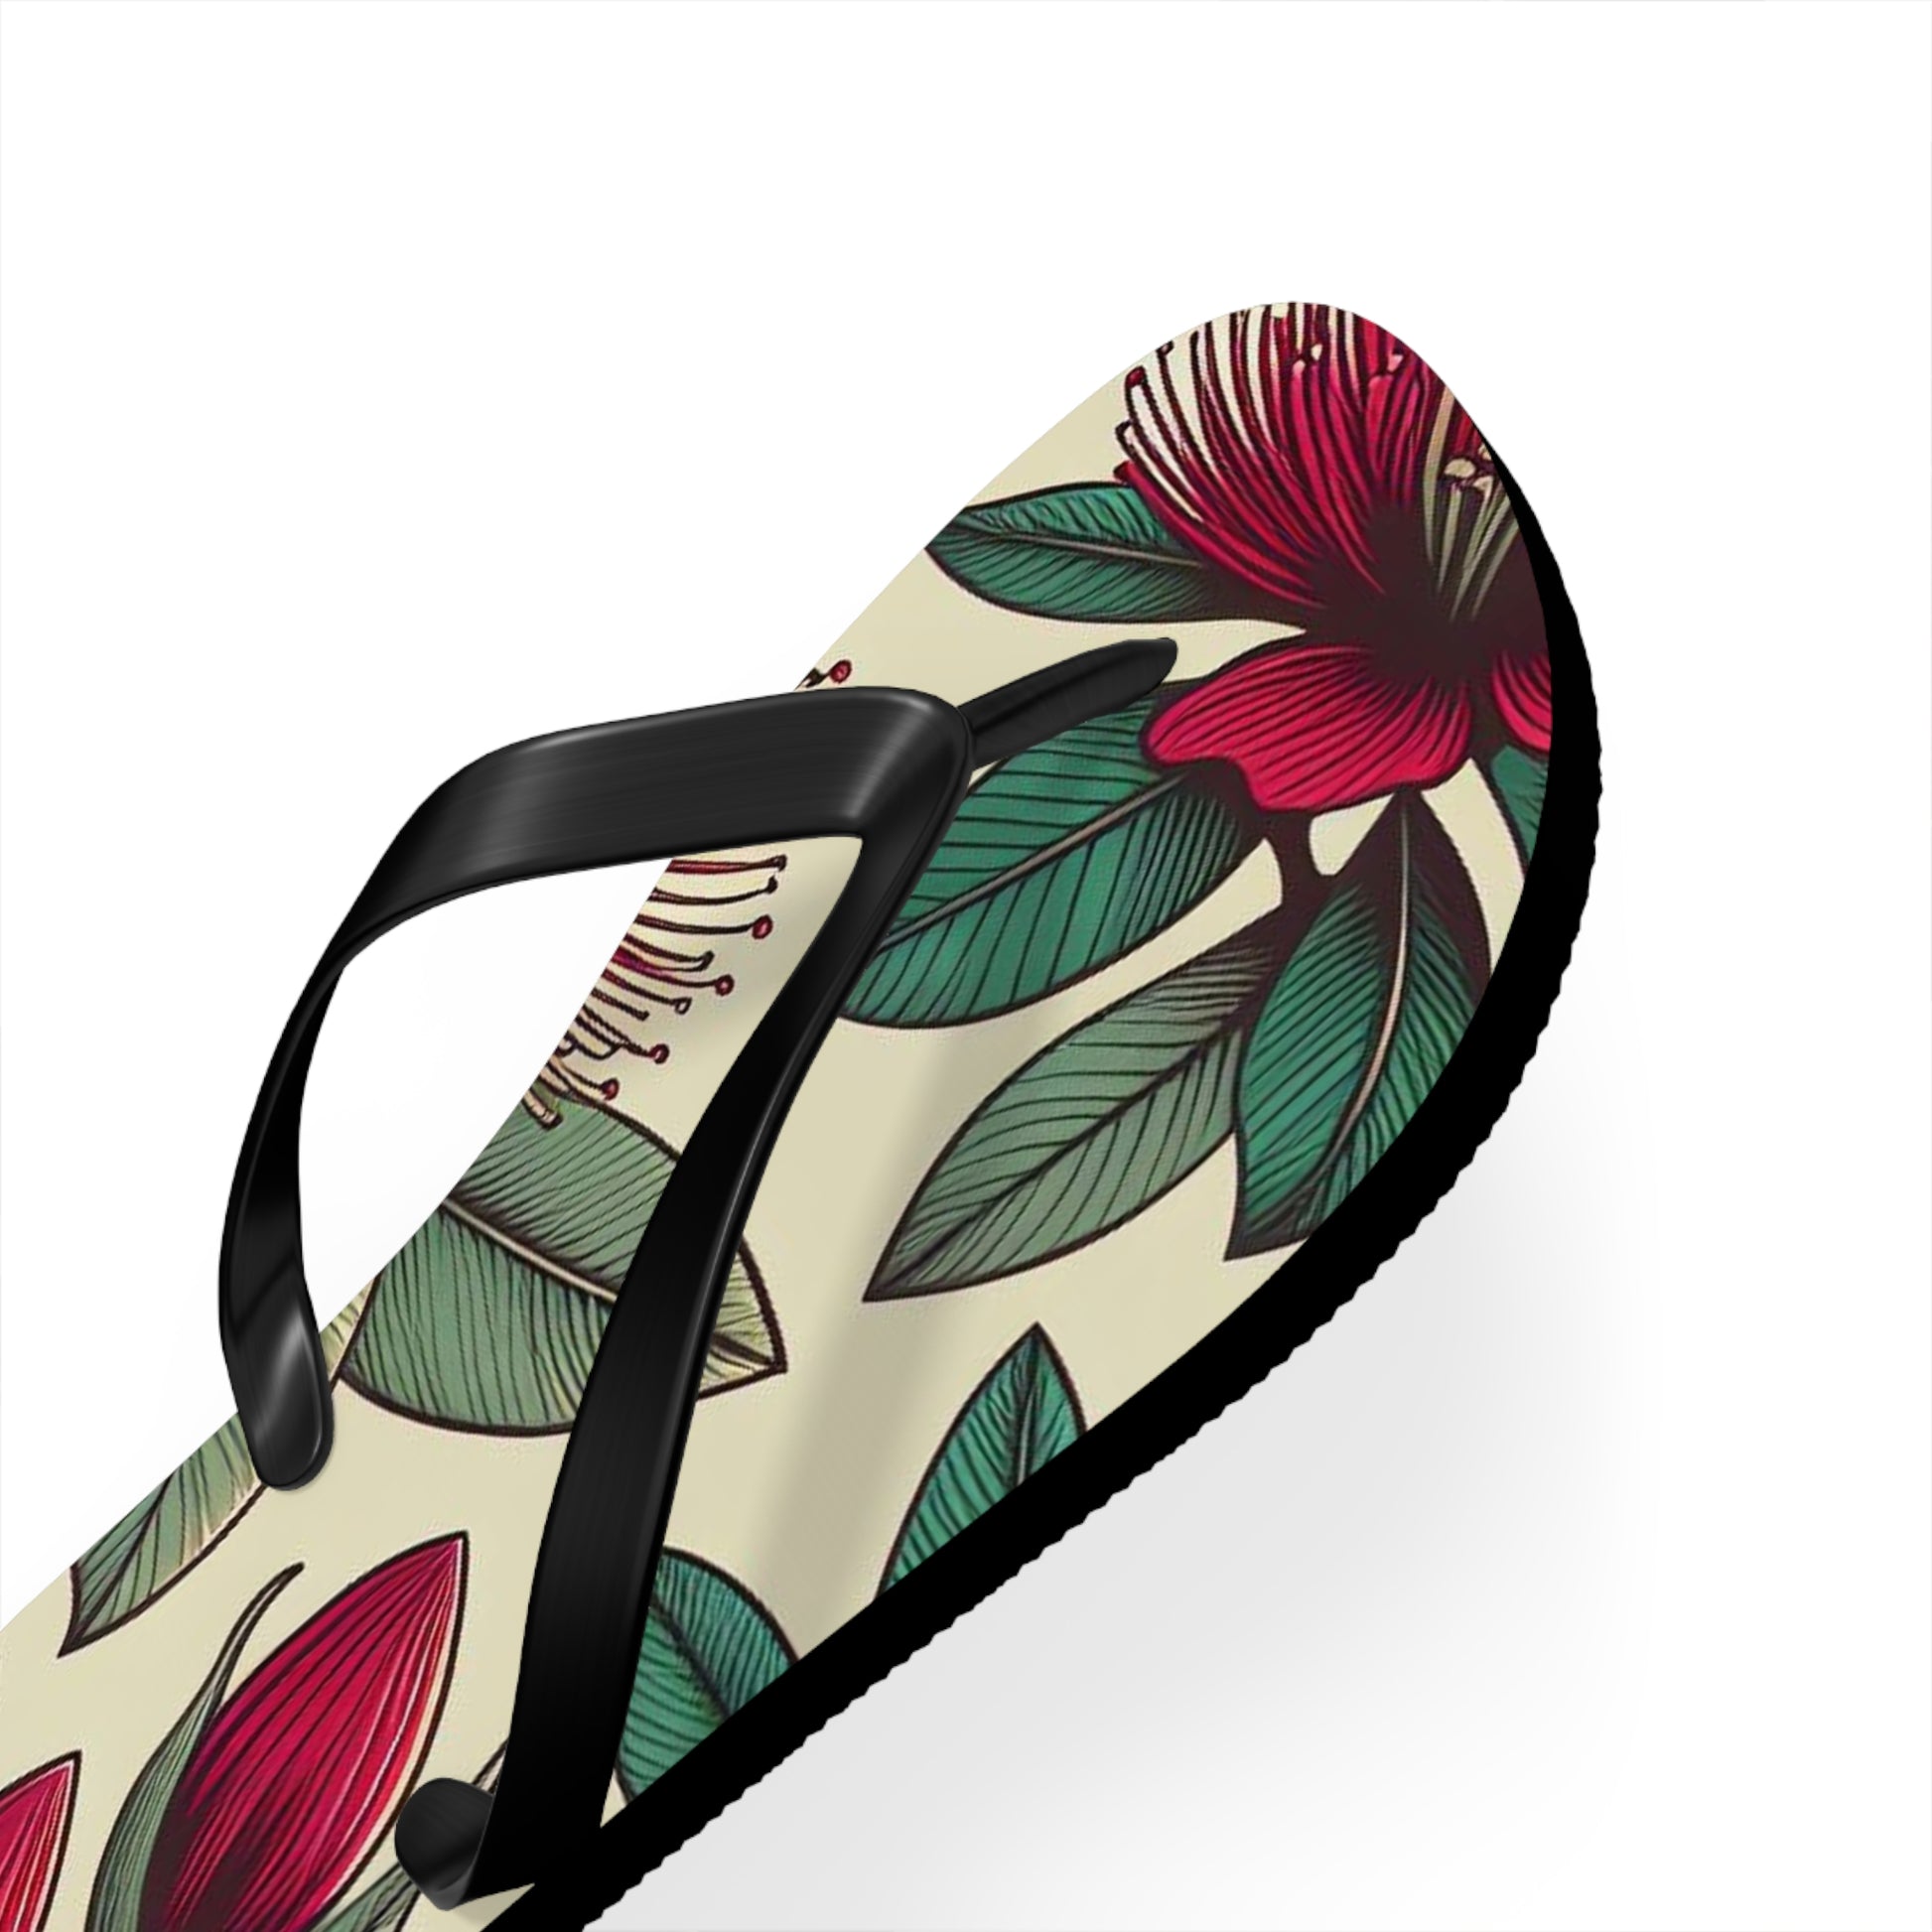 a pair of women's flip flops with flowers on them